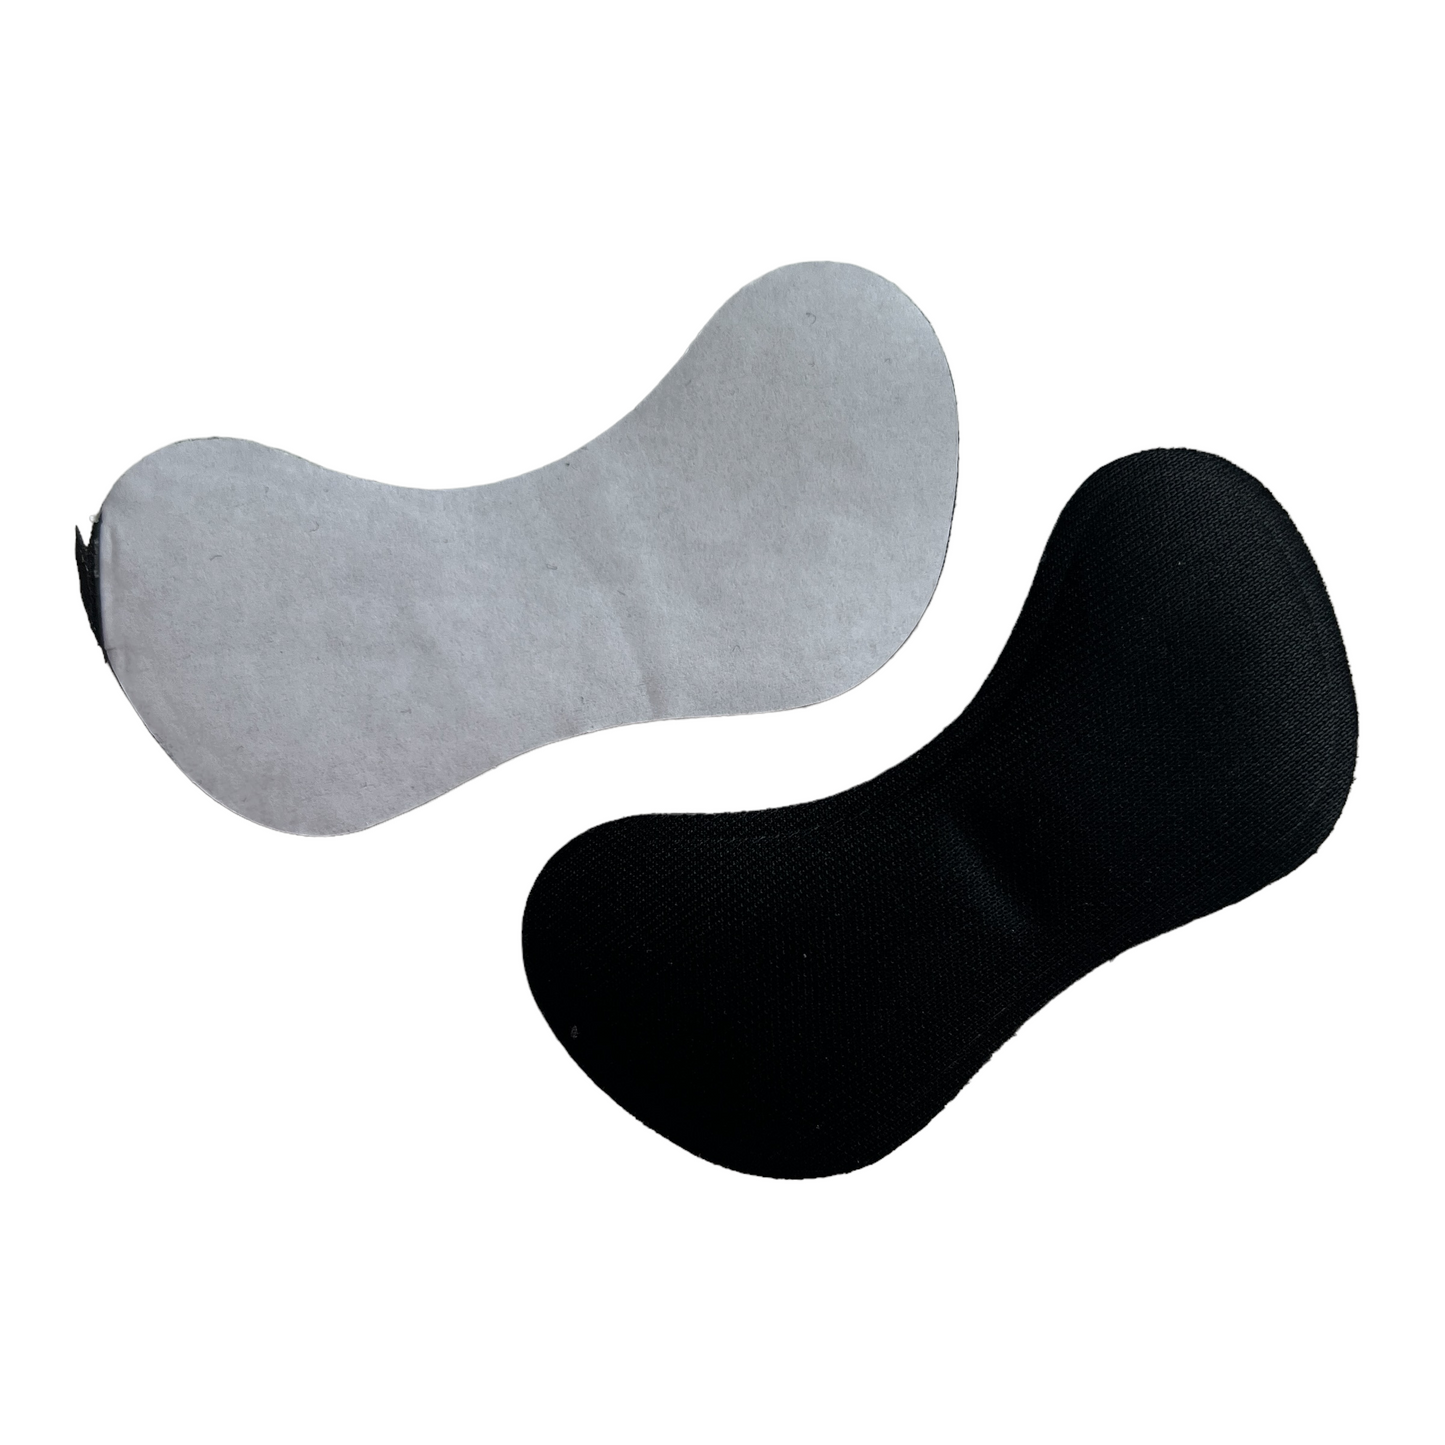 Heel Insoles Pads - Pain Relief Mobility & Accessibility SPIRIT SPARKPLUGS   